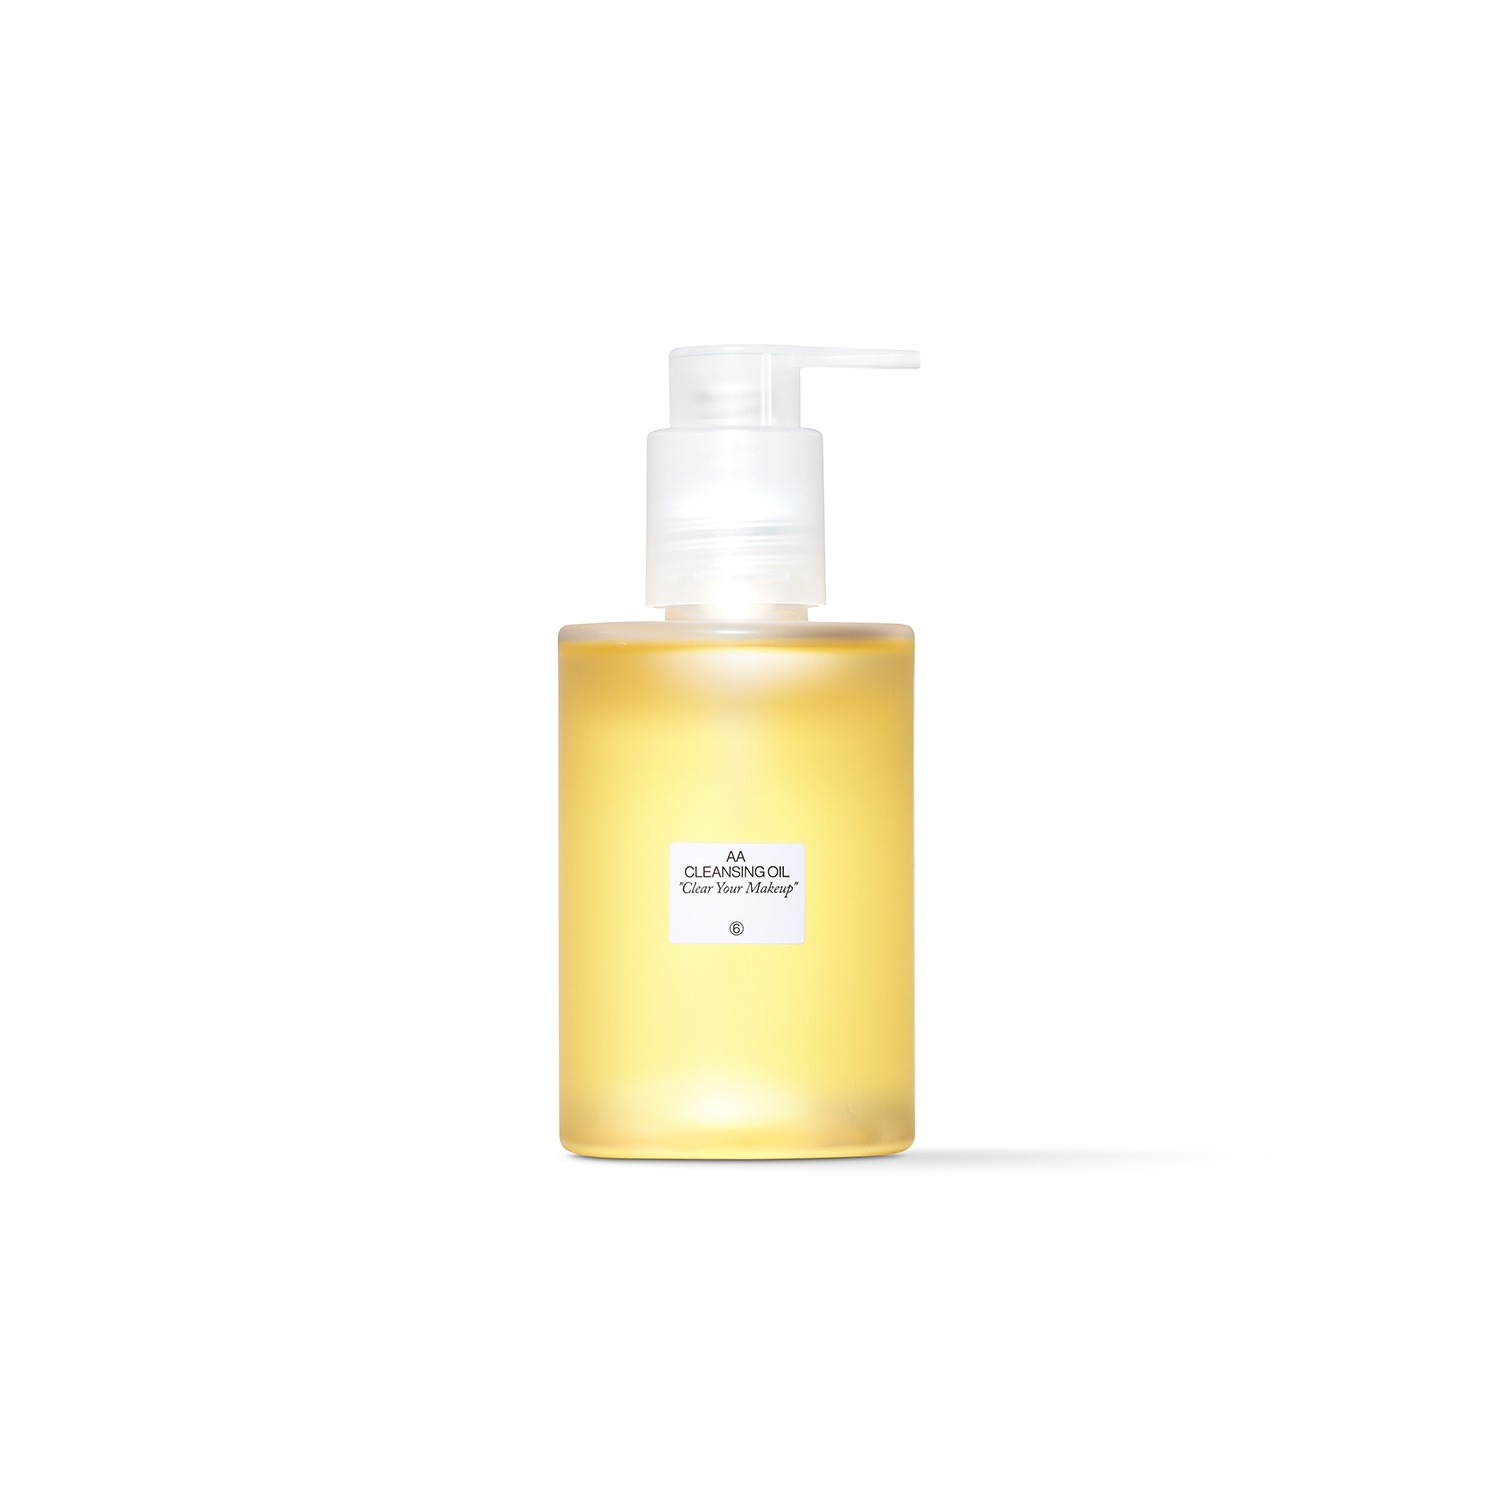 SHANGPREE(シャンプリー) AA CLEANSING OIL